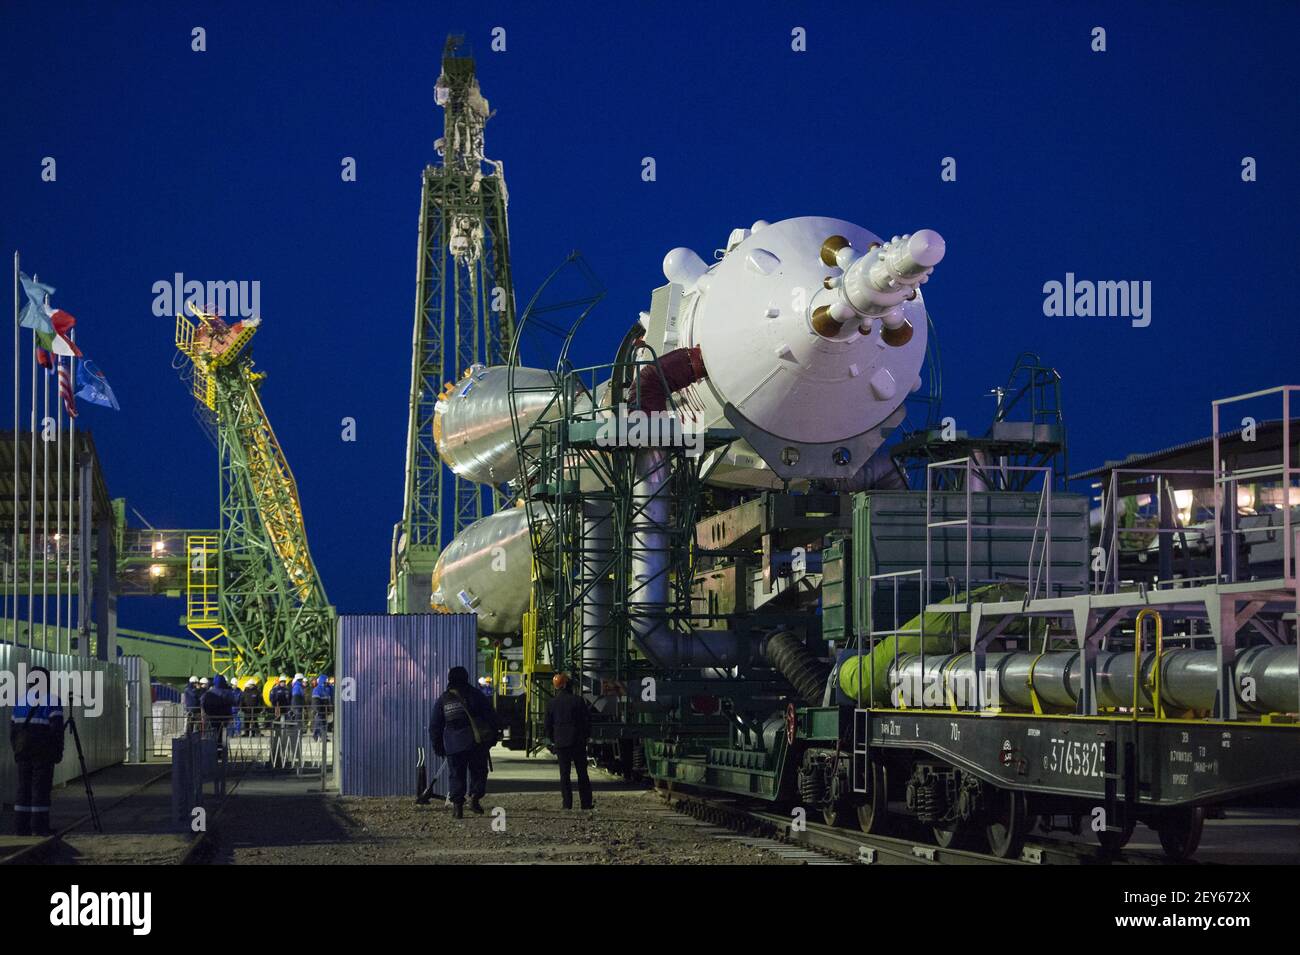 The Soyuz TMA-15M spacecraft is rolled out to the launch pad by train on Friday, Nov. 21, 2014 at the Baikonur Cosmodrome in Kazakhstan. Launch of the Soyuz rocket is scheduled for Nov. 24 and will carry Expedition 42 Soyuz Commander Anton Shkaplerov of the Russian Federal Space Agency (Roscosmos), Flight Engineer Terry Virts of NASA , and Flight Engineer Samantha Cristoforetti of the European Space Agency into orbit to begin their five and a half month mission on the International Space Station. Image Credit: Aubrey Gemignani/NASA/Sipa USA Stock Photo